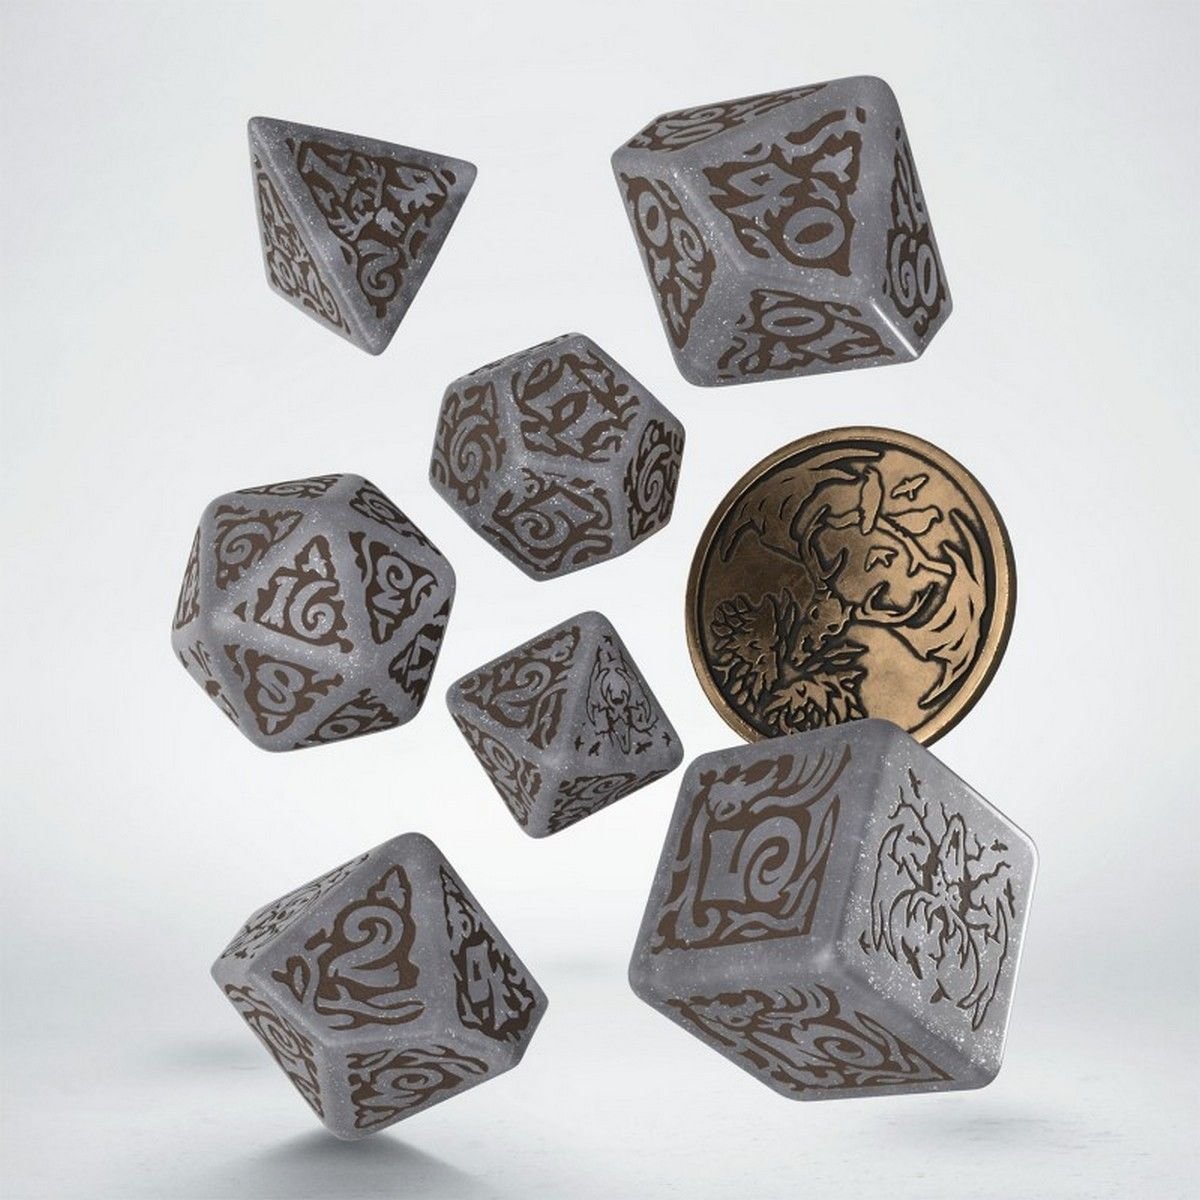 The Witcher Dice Set. Leshen - The Shapeshifter